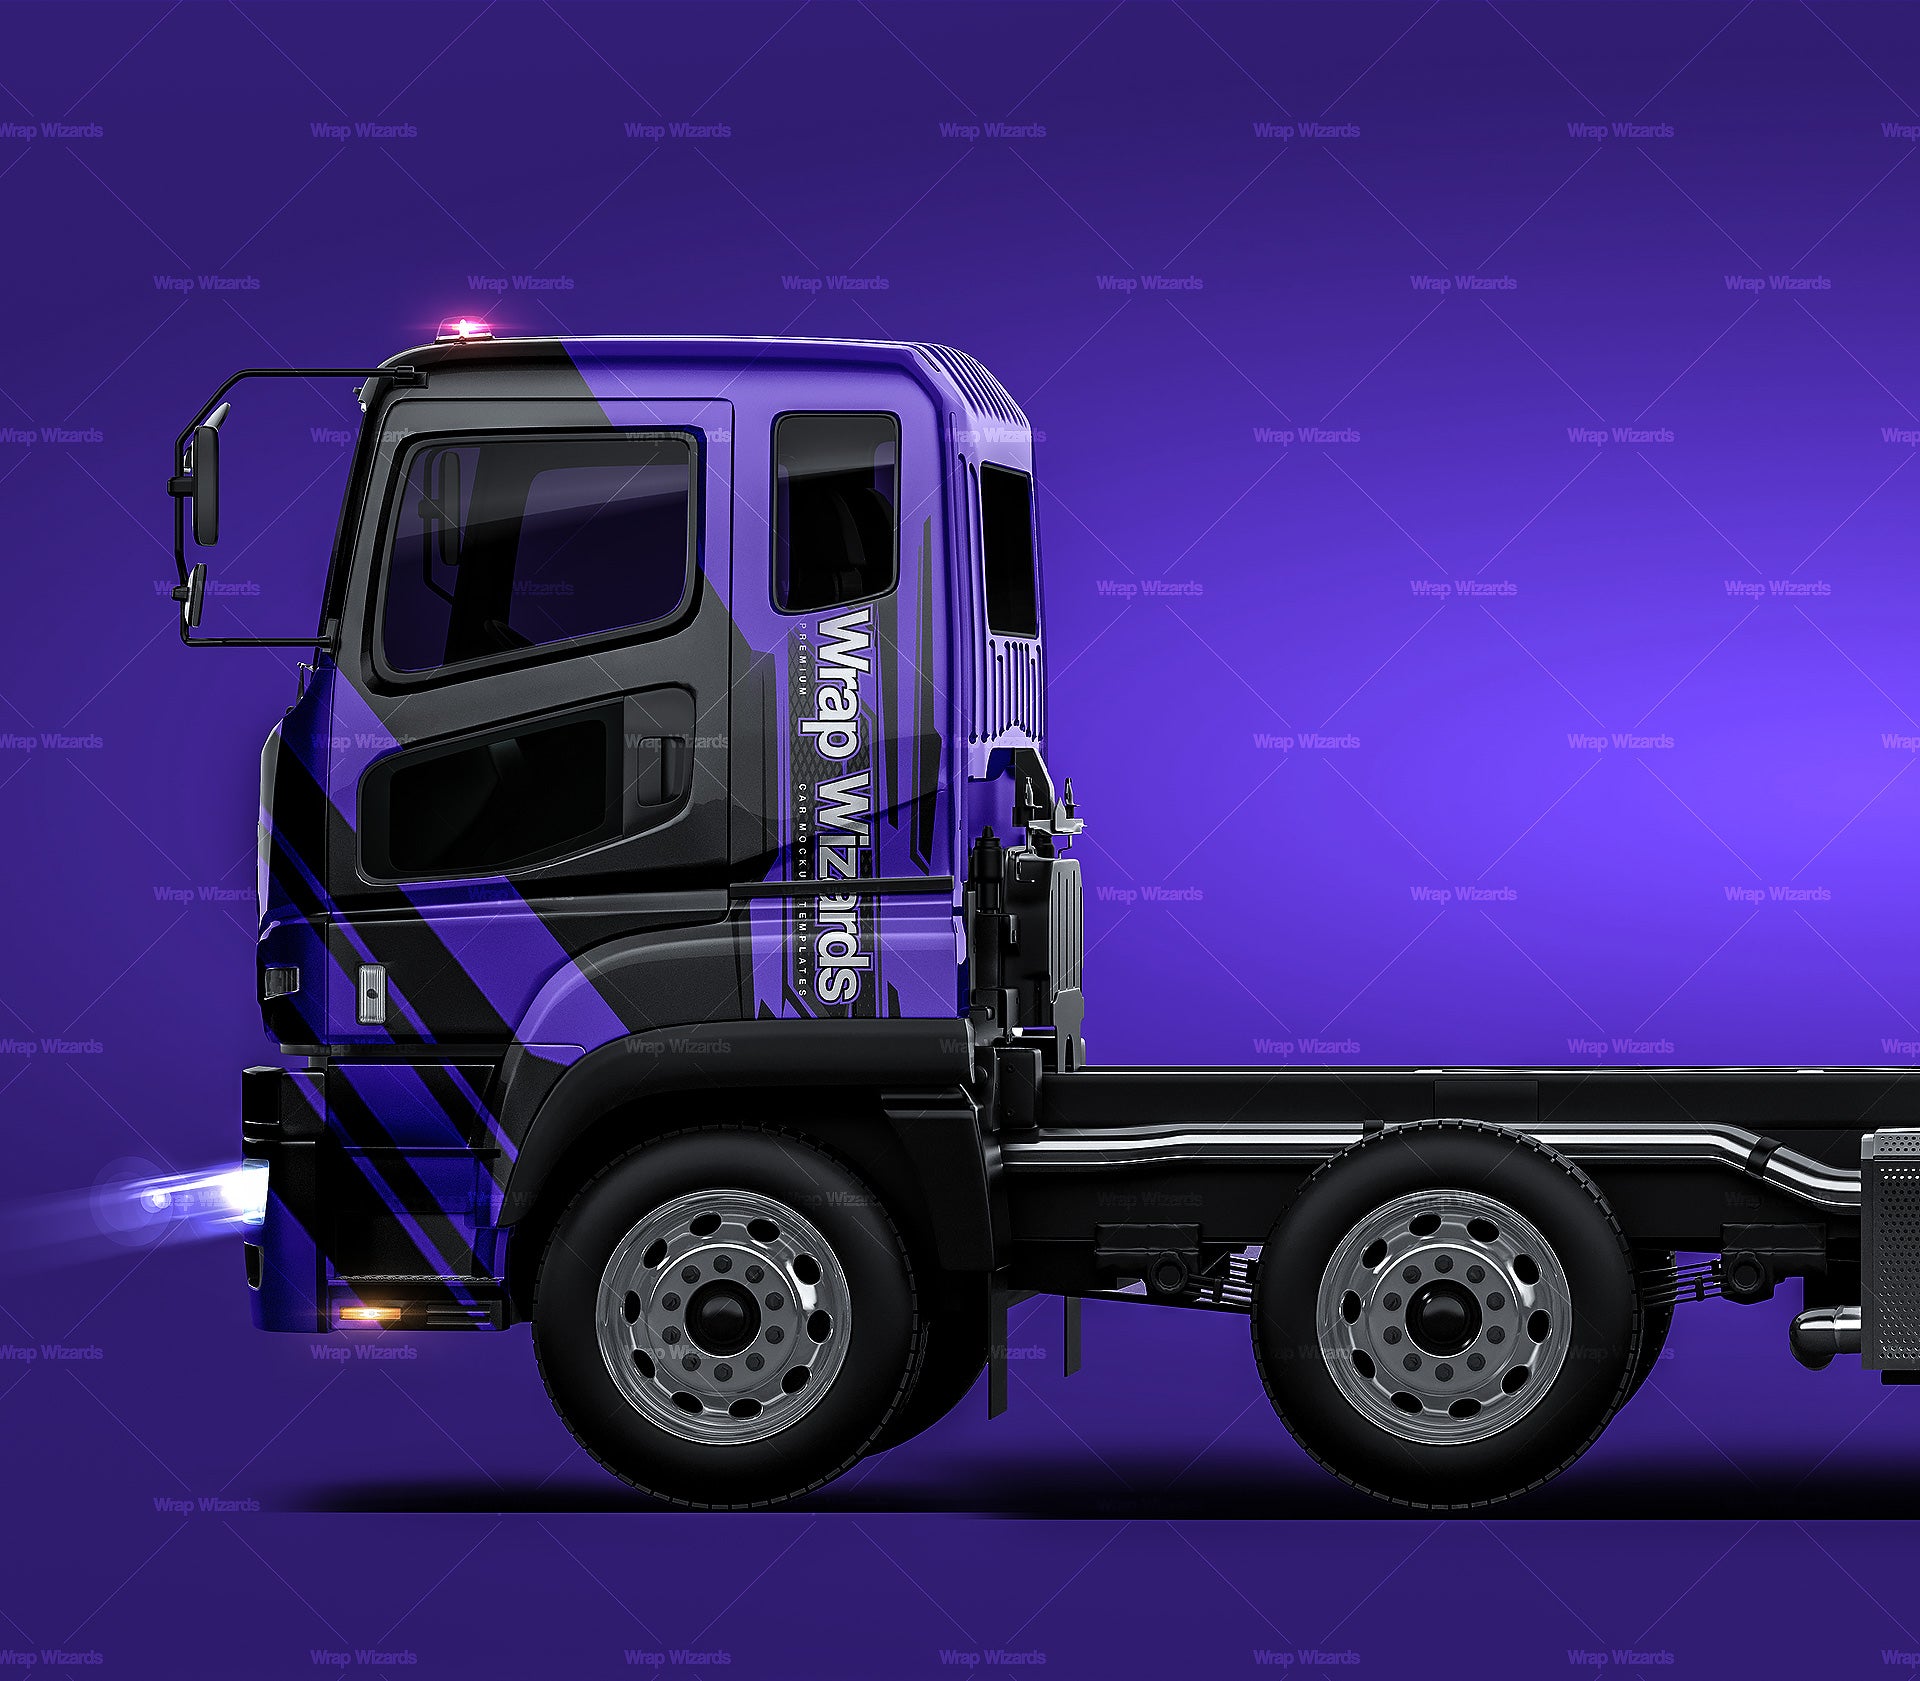 Mitsubishi Fuso Heavy Truck chassis glossy finish - all sides Car Mockup Template.psd